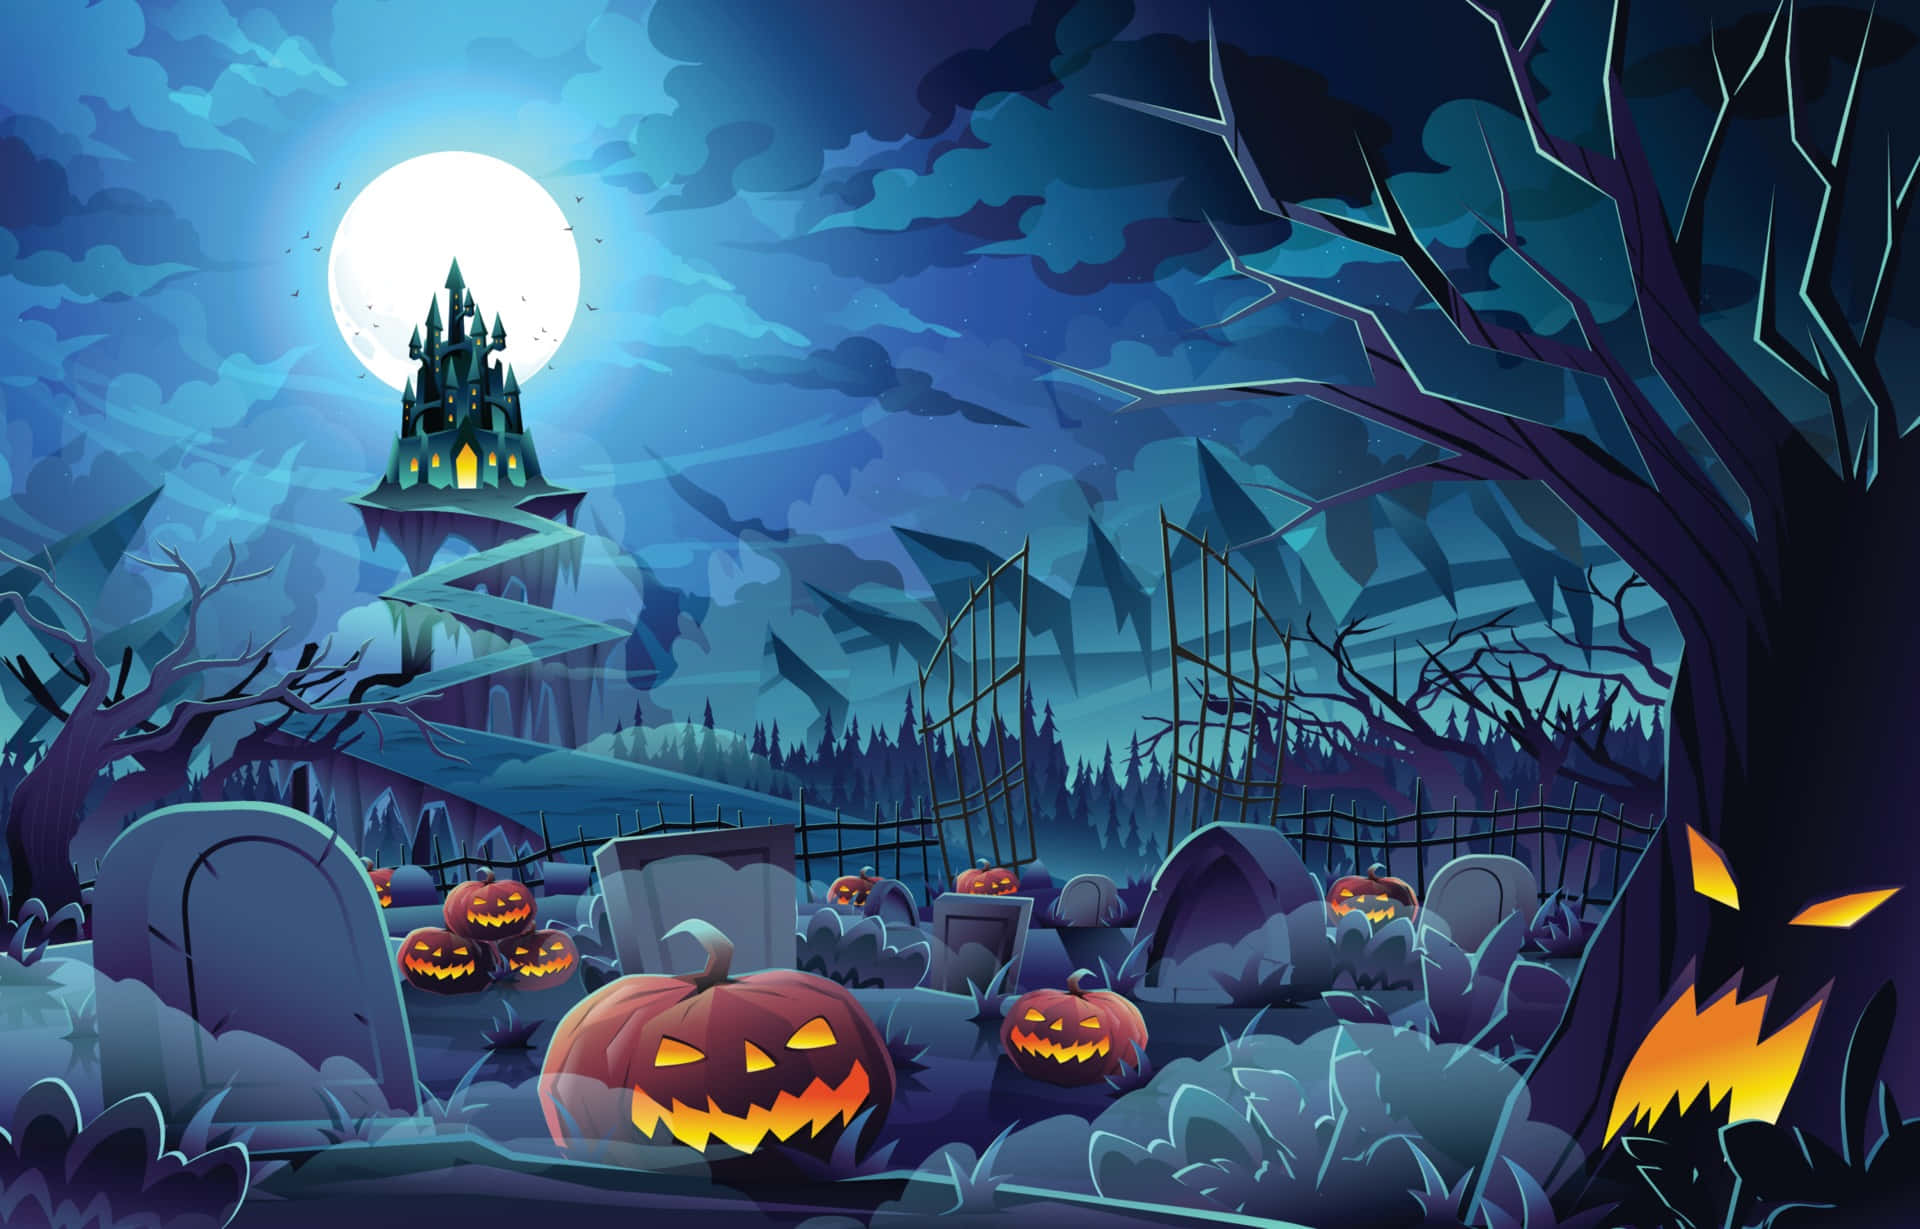 Celebrate The Beauty Of Halloween With The Vivid Colors Of This Festive Season. Wallpaper